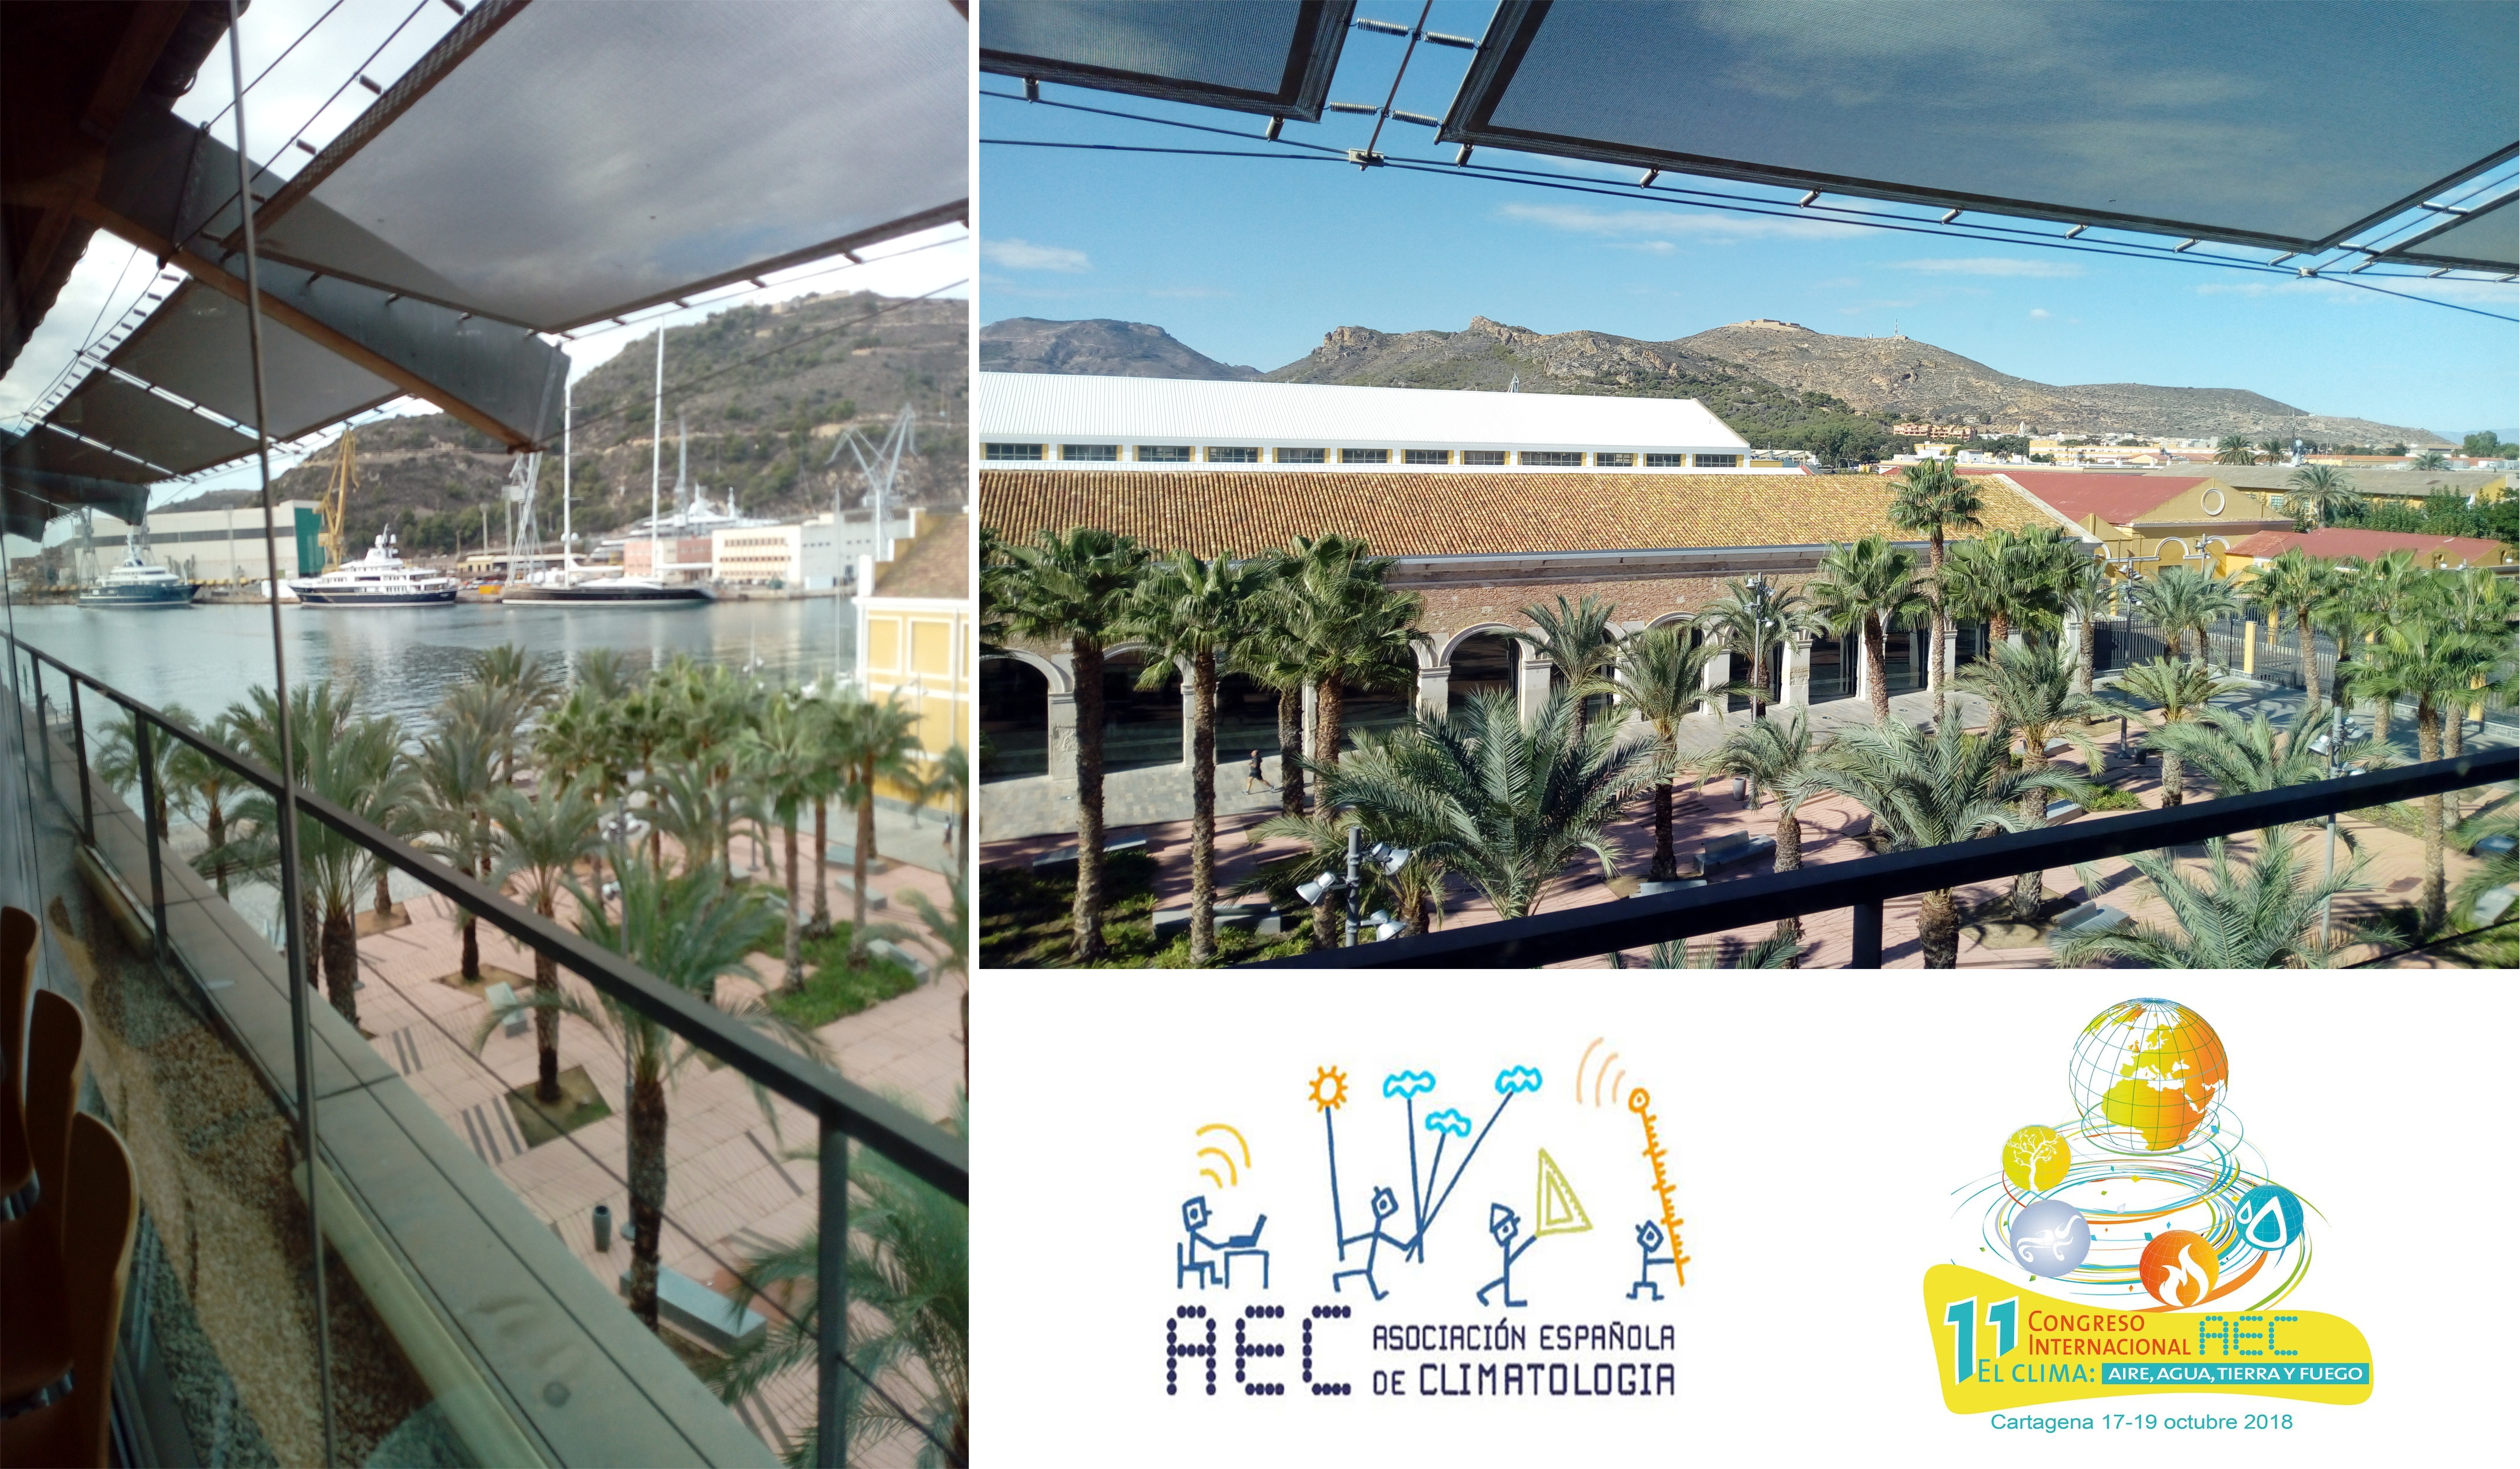 Figure 1. Views from the Polytechnic University of Cartagena (Spain) and logo of the Spanish Association of Climatology and its 11th International Congress.